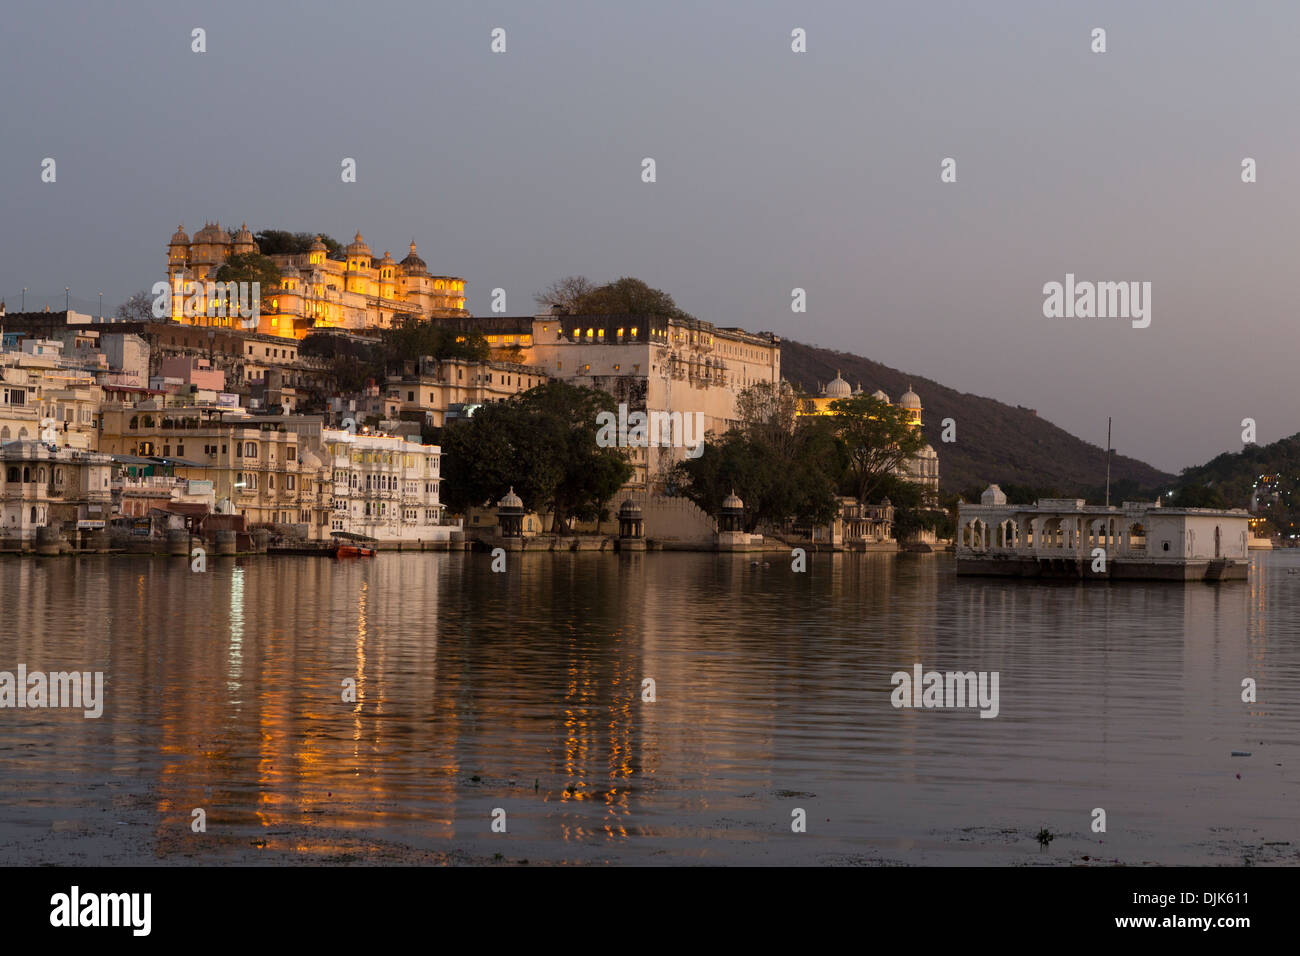 View of the city of Udaipur in the evening, with Lake Pichola and the City Palace illuminated background Stock Photo